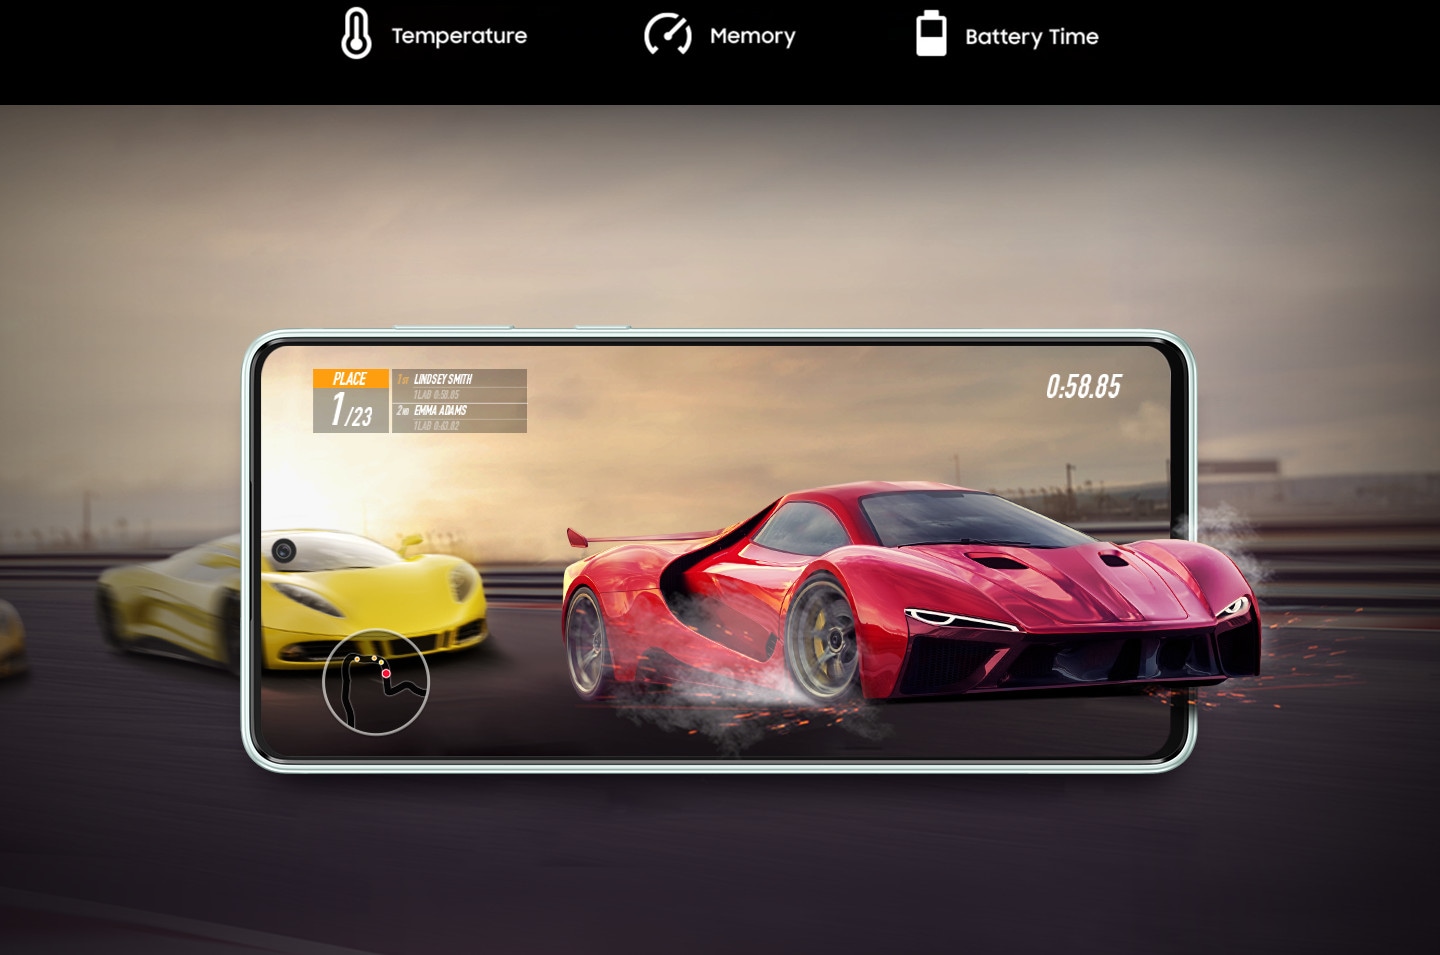 Samsung Galaxy A73 5G specs and features, optimisation - An A73 screen shows a racing car driving out of the the screen. Above, text reads Temperature, Memory and Battery Time.